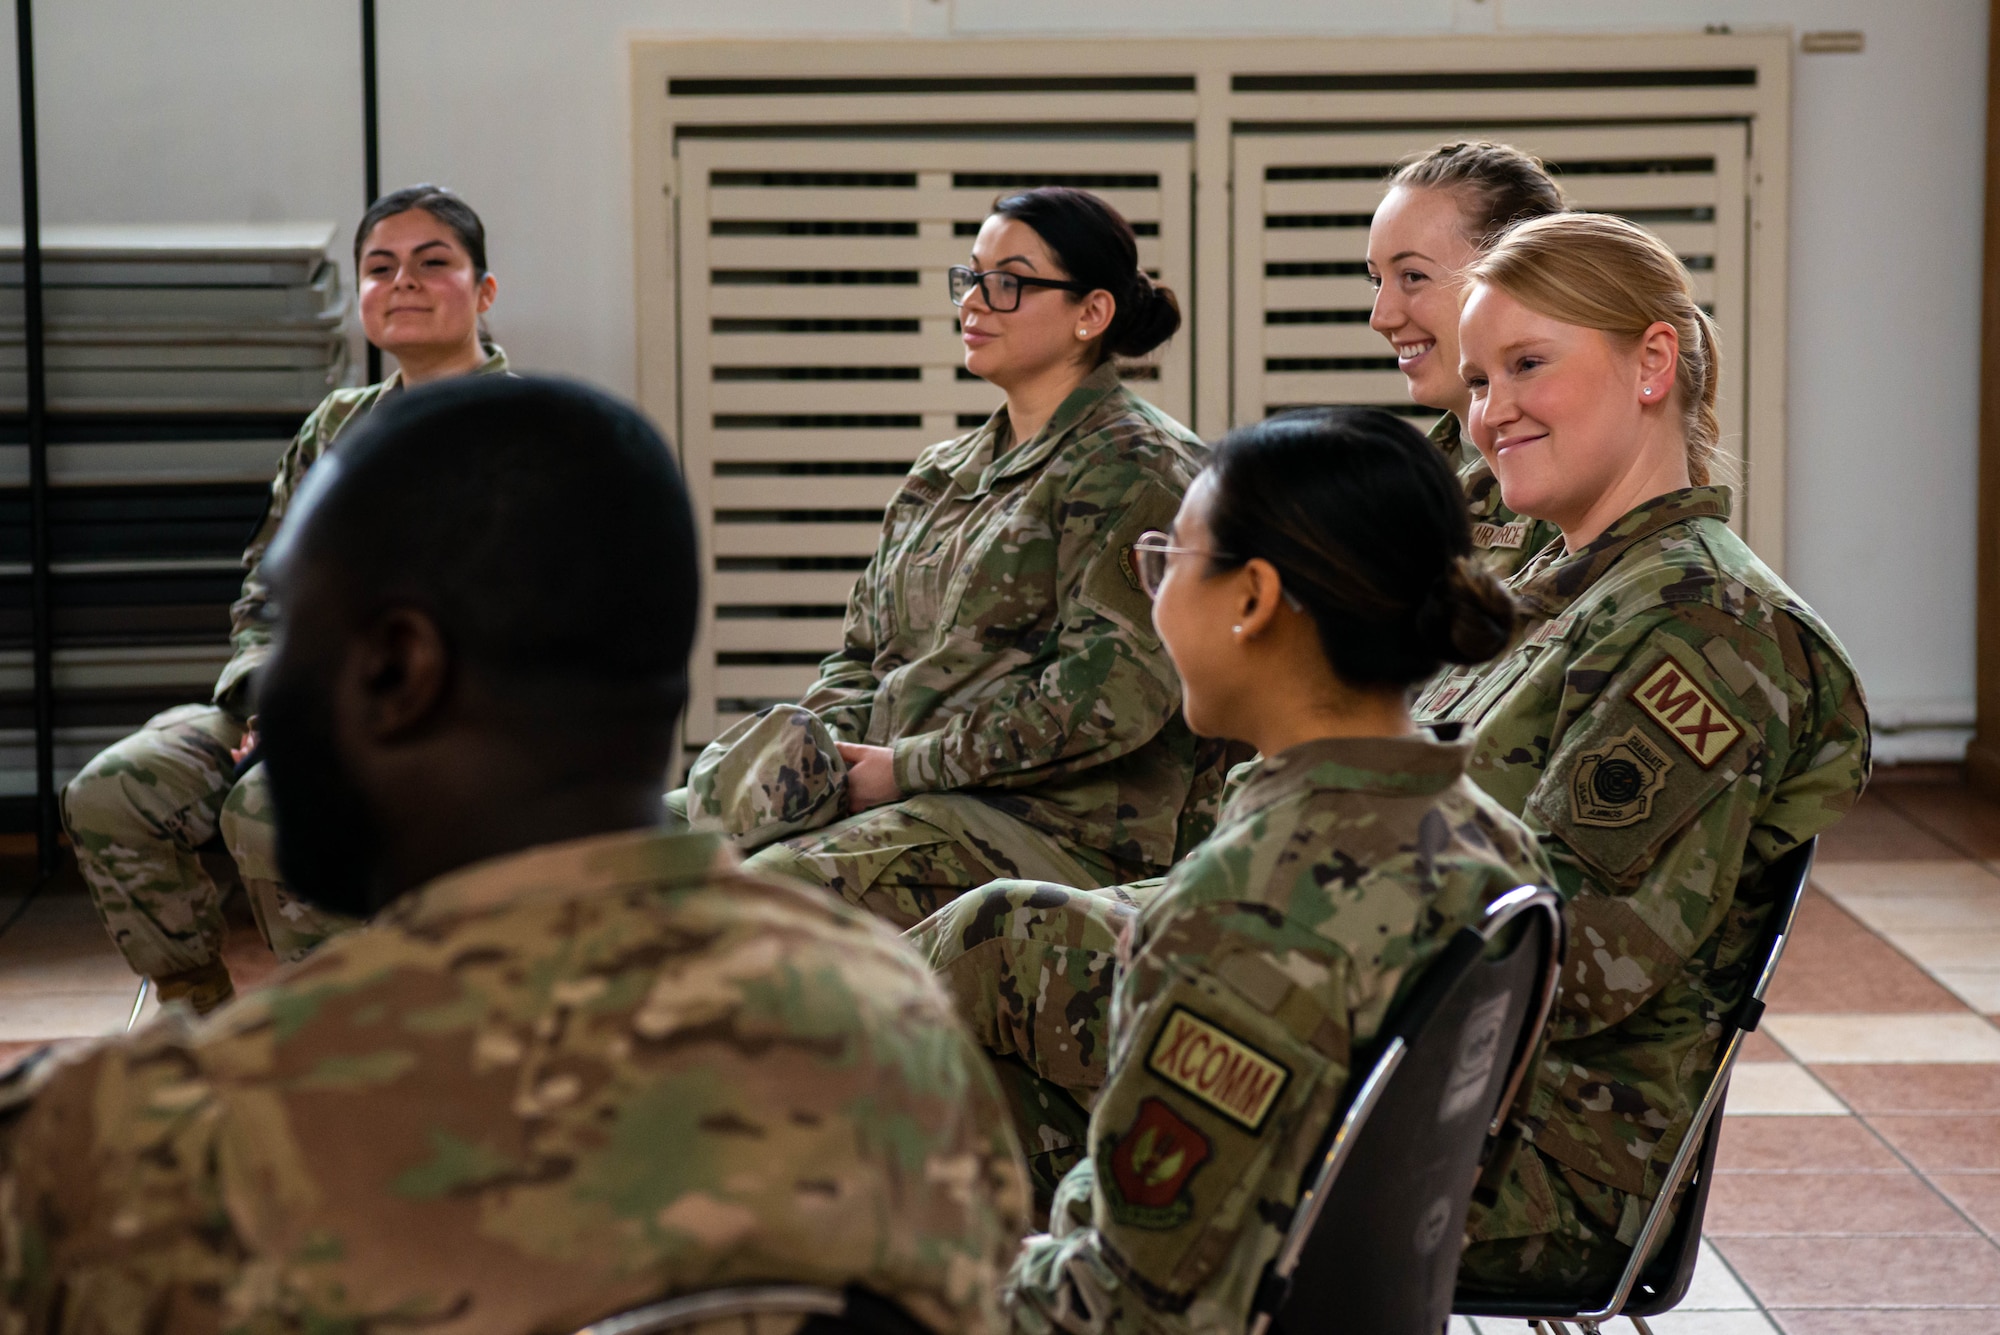 Airman sit and talk during a panel.